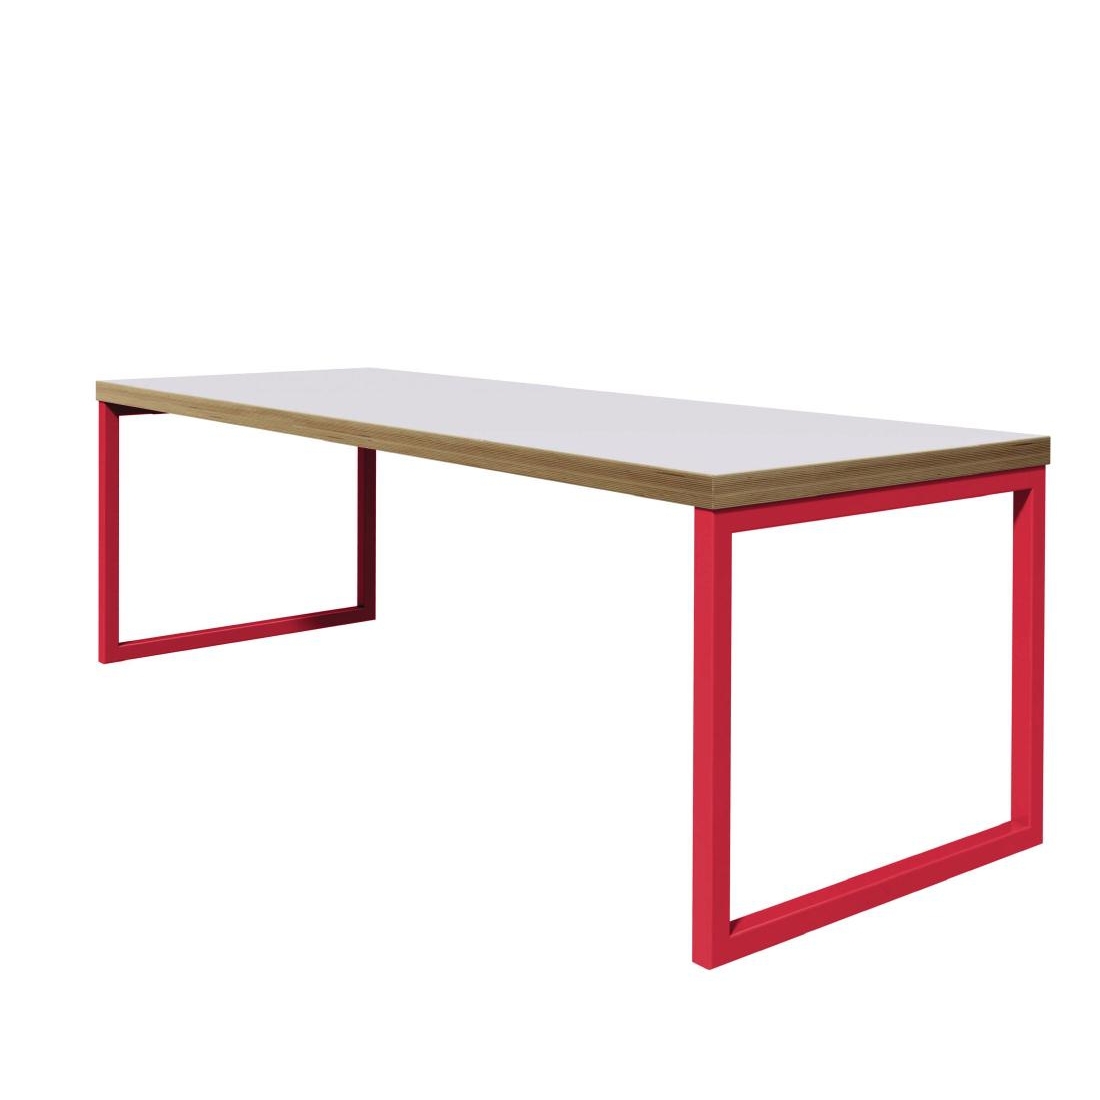 Bolero Dining Table White with Red Frame 4ft